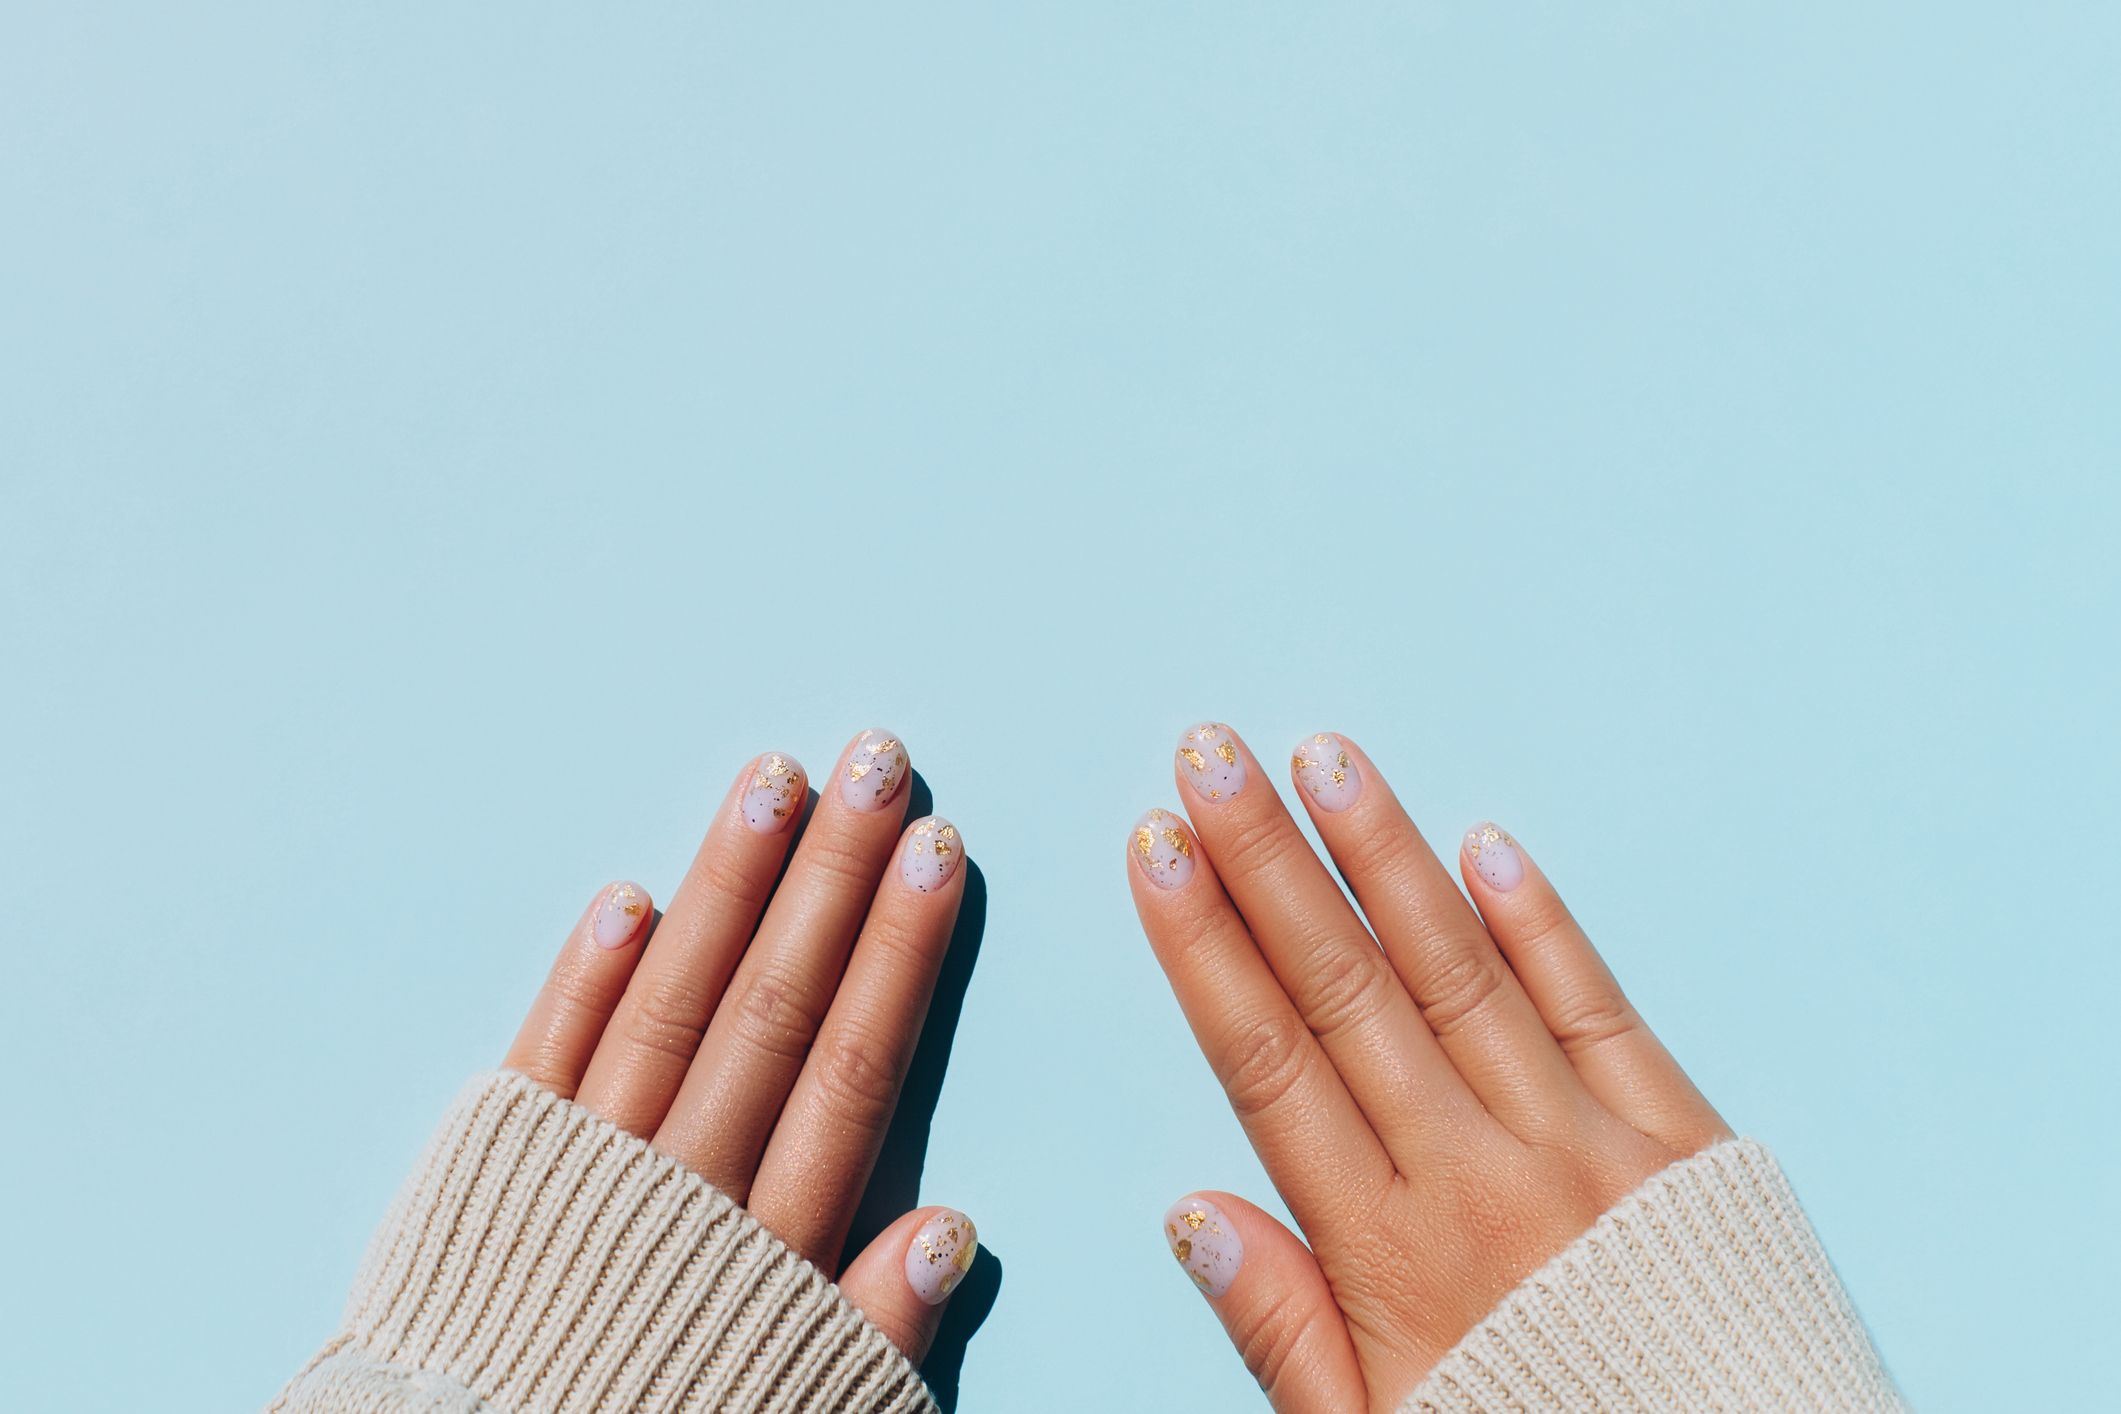 How to Stop Your Nails From Peeling, According to Dermatologists